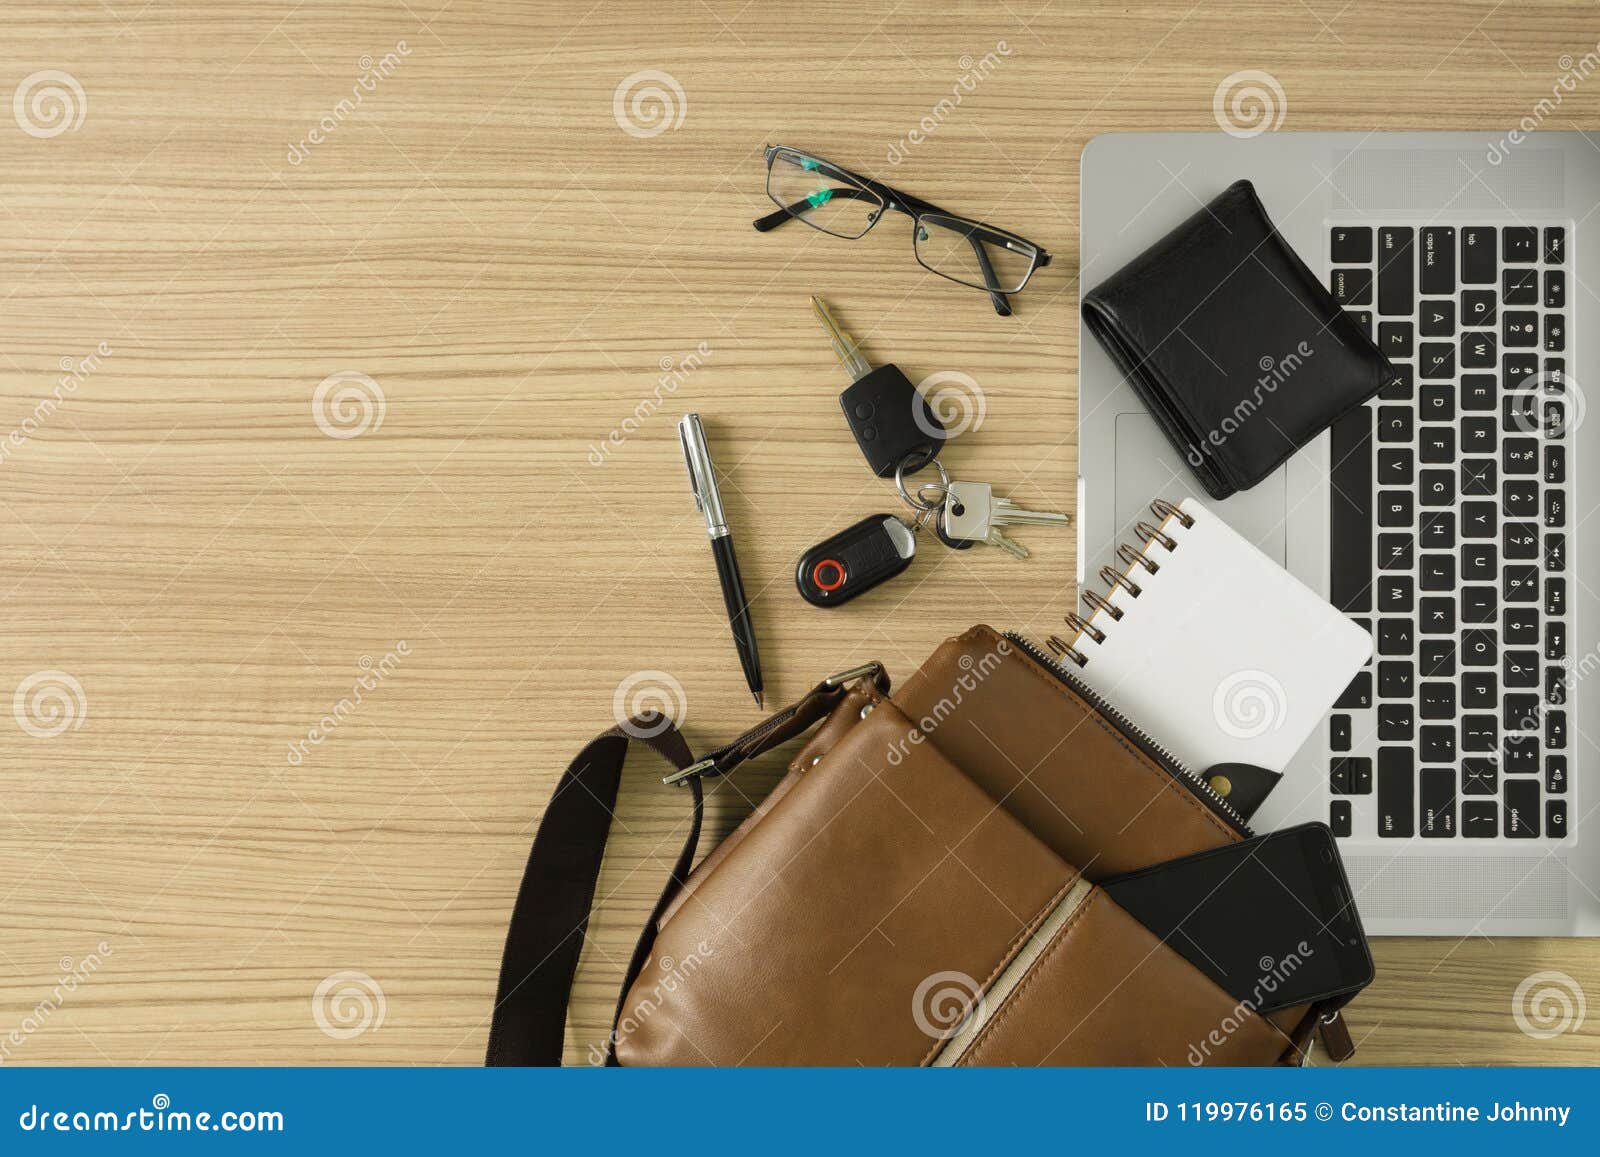 Men S Leather Bag And Laptop On Wood Background Stock Image